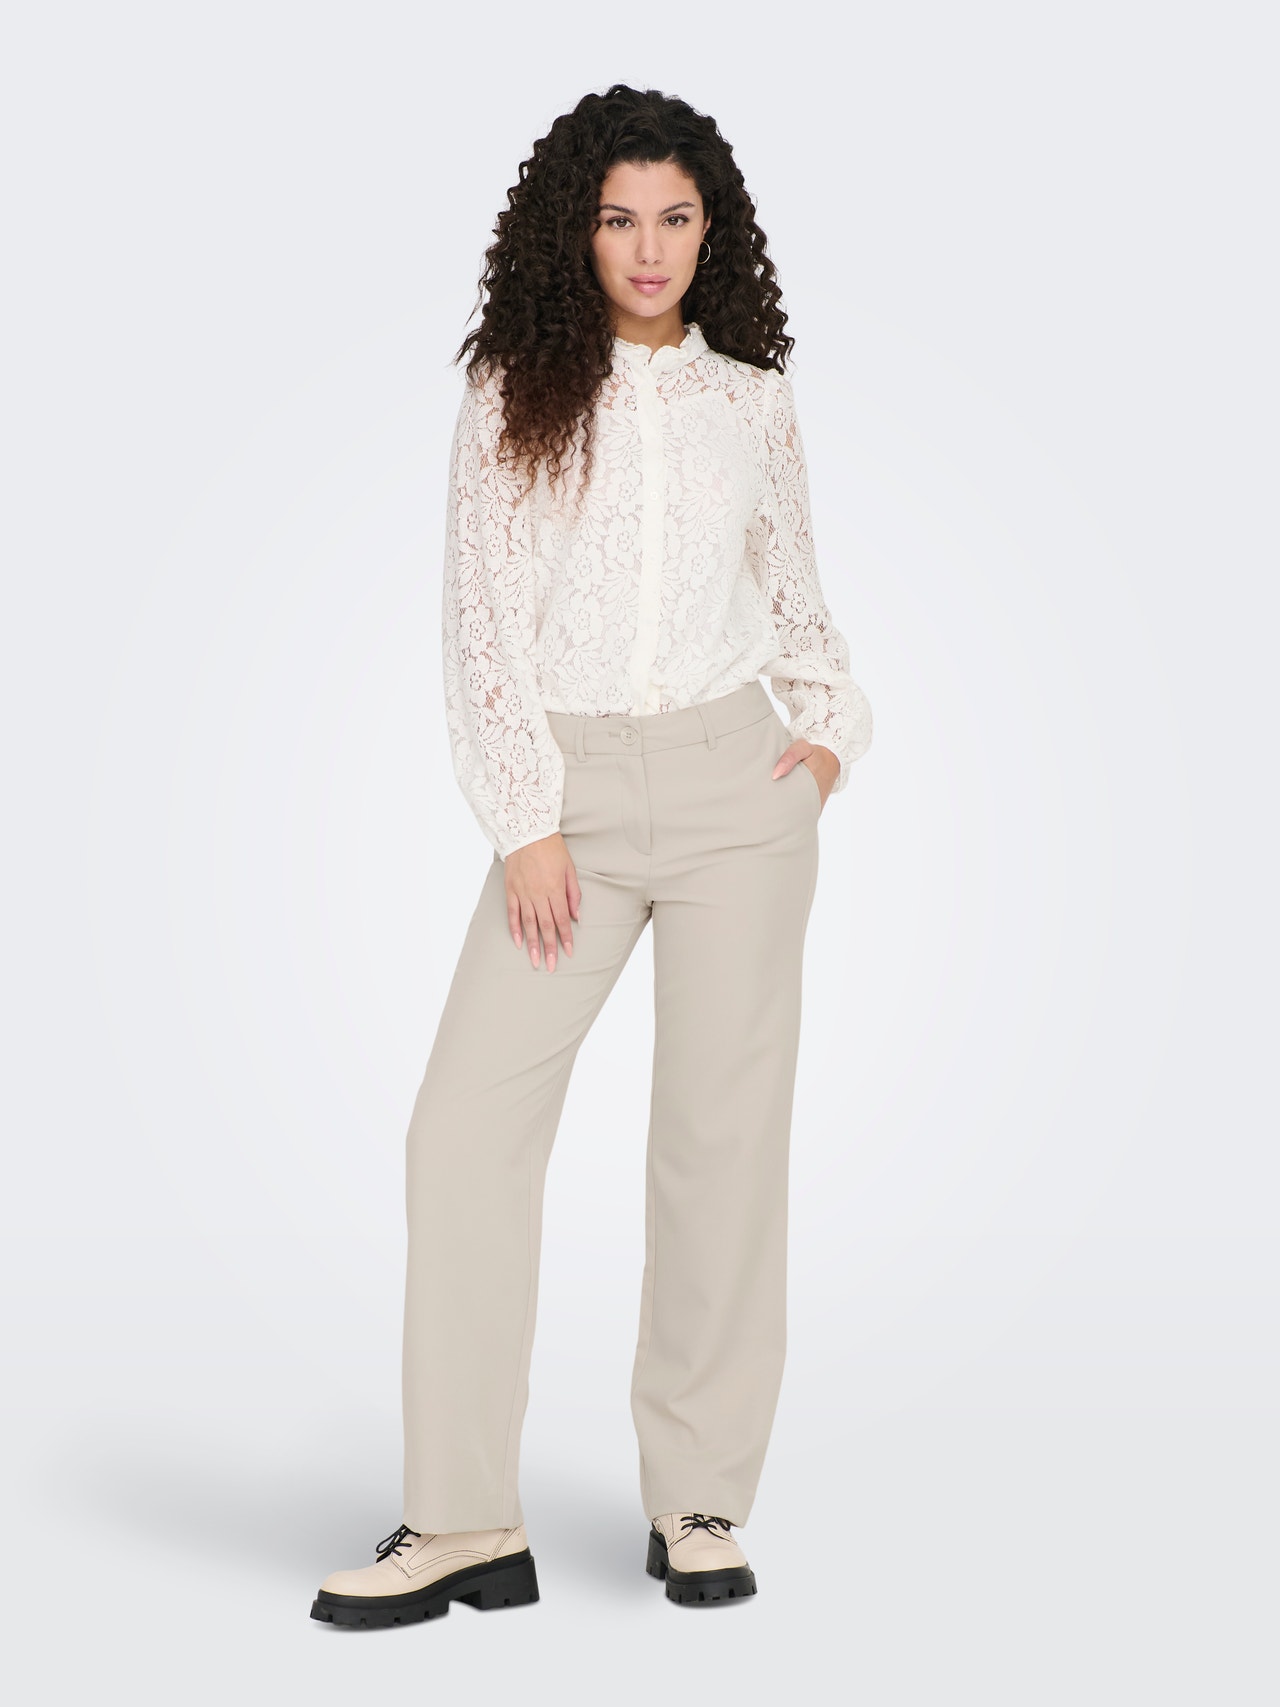 ONLY Pantalons Straight Fit Taille moyenne -Pumice Stone - 15267759